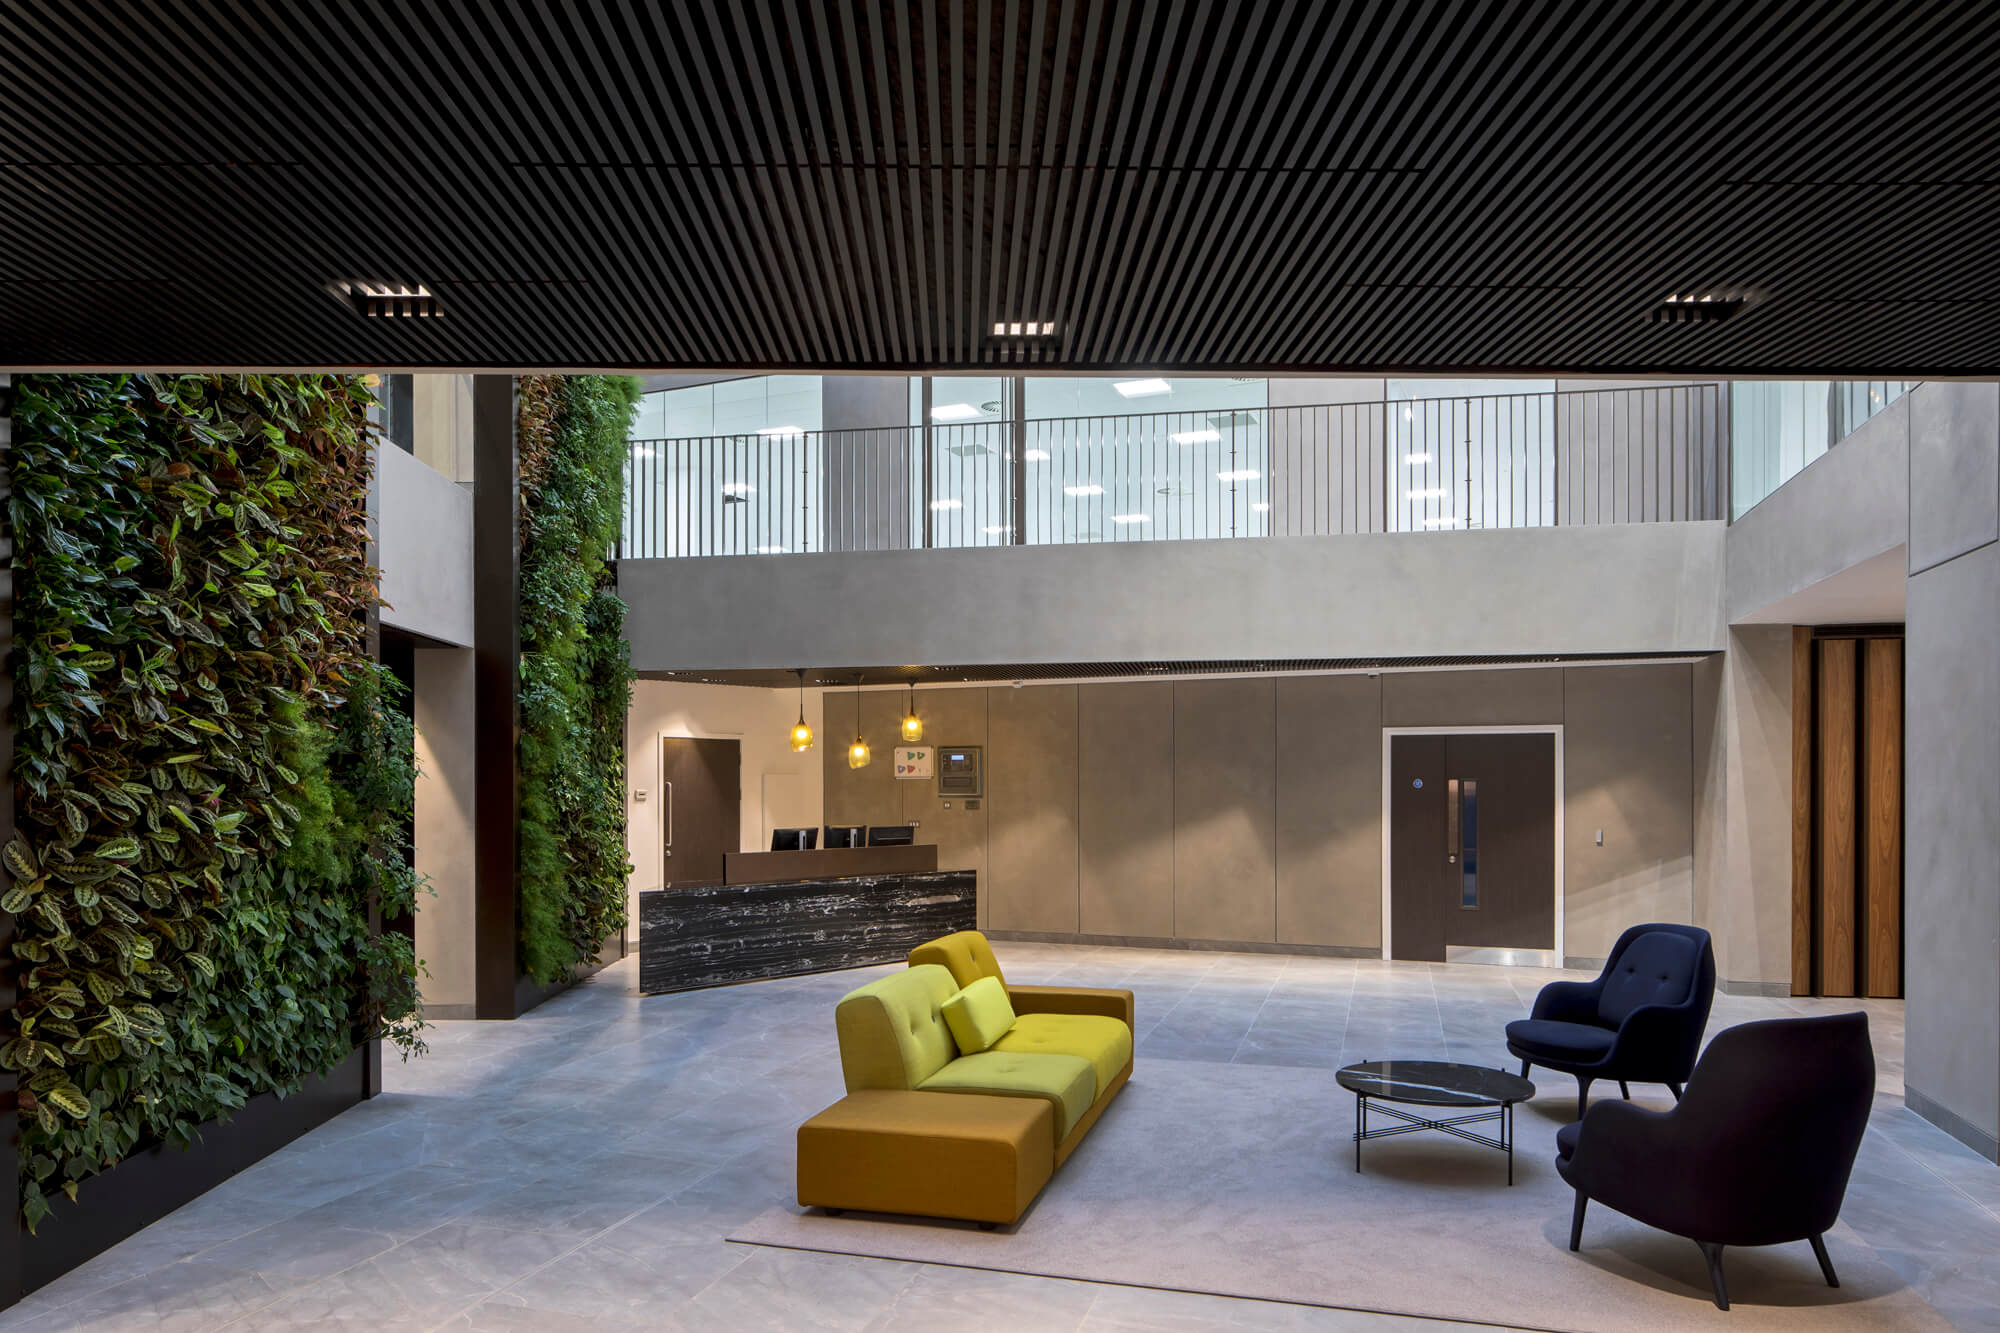 How to integrate M&E into Slatted Acoustic Ceilings